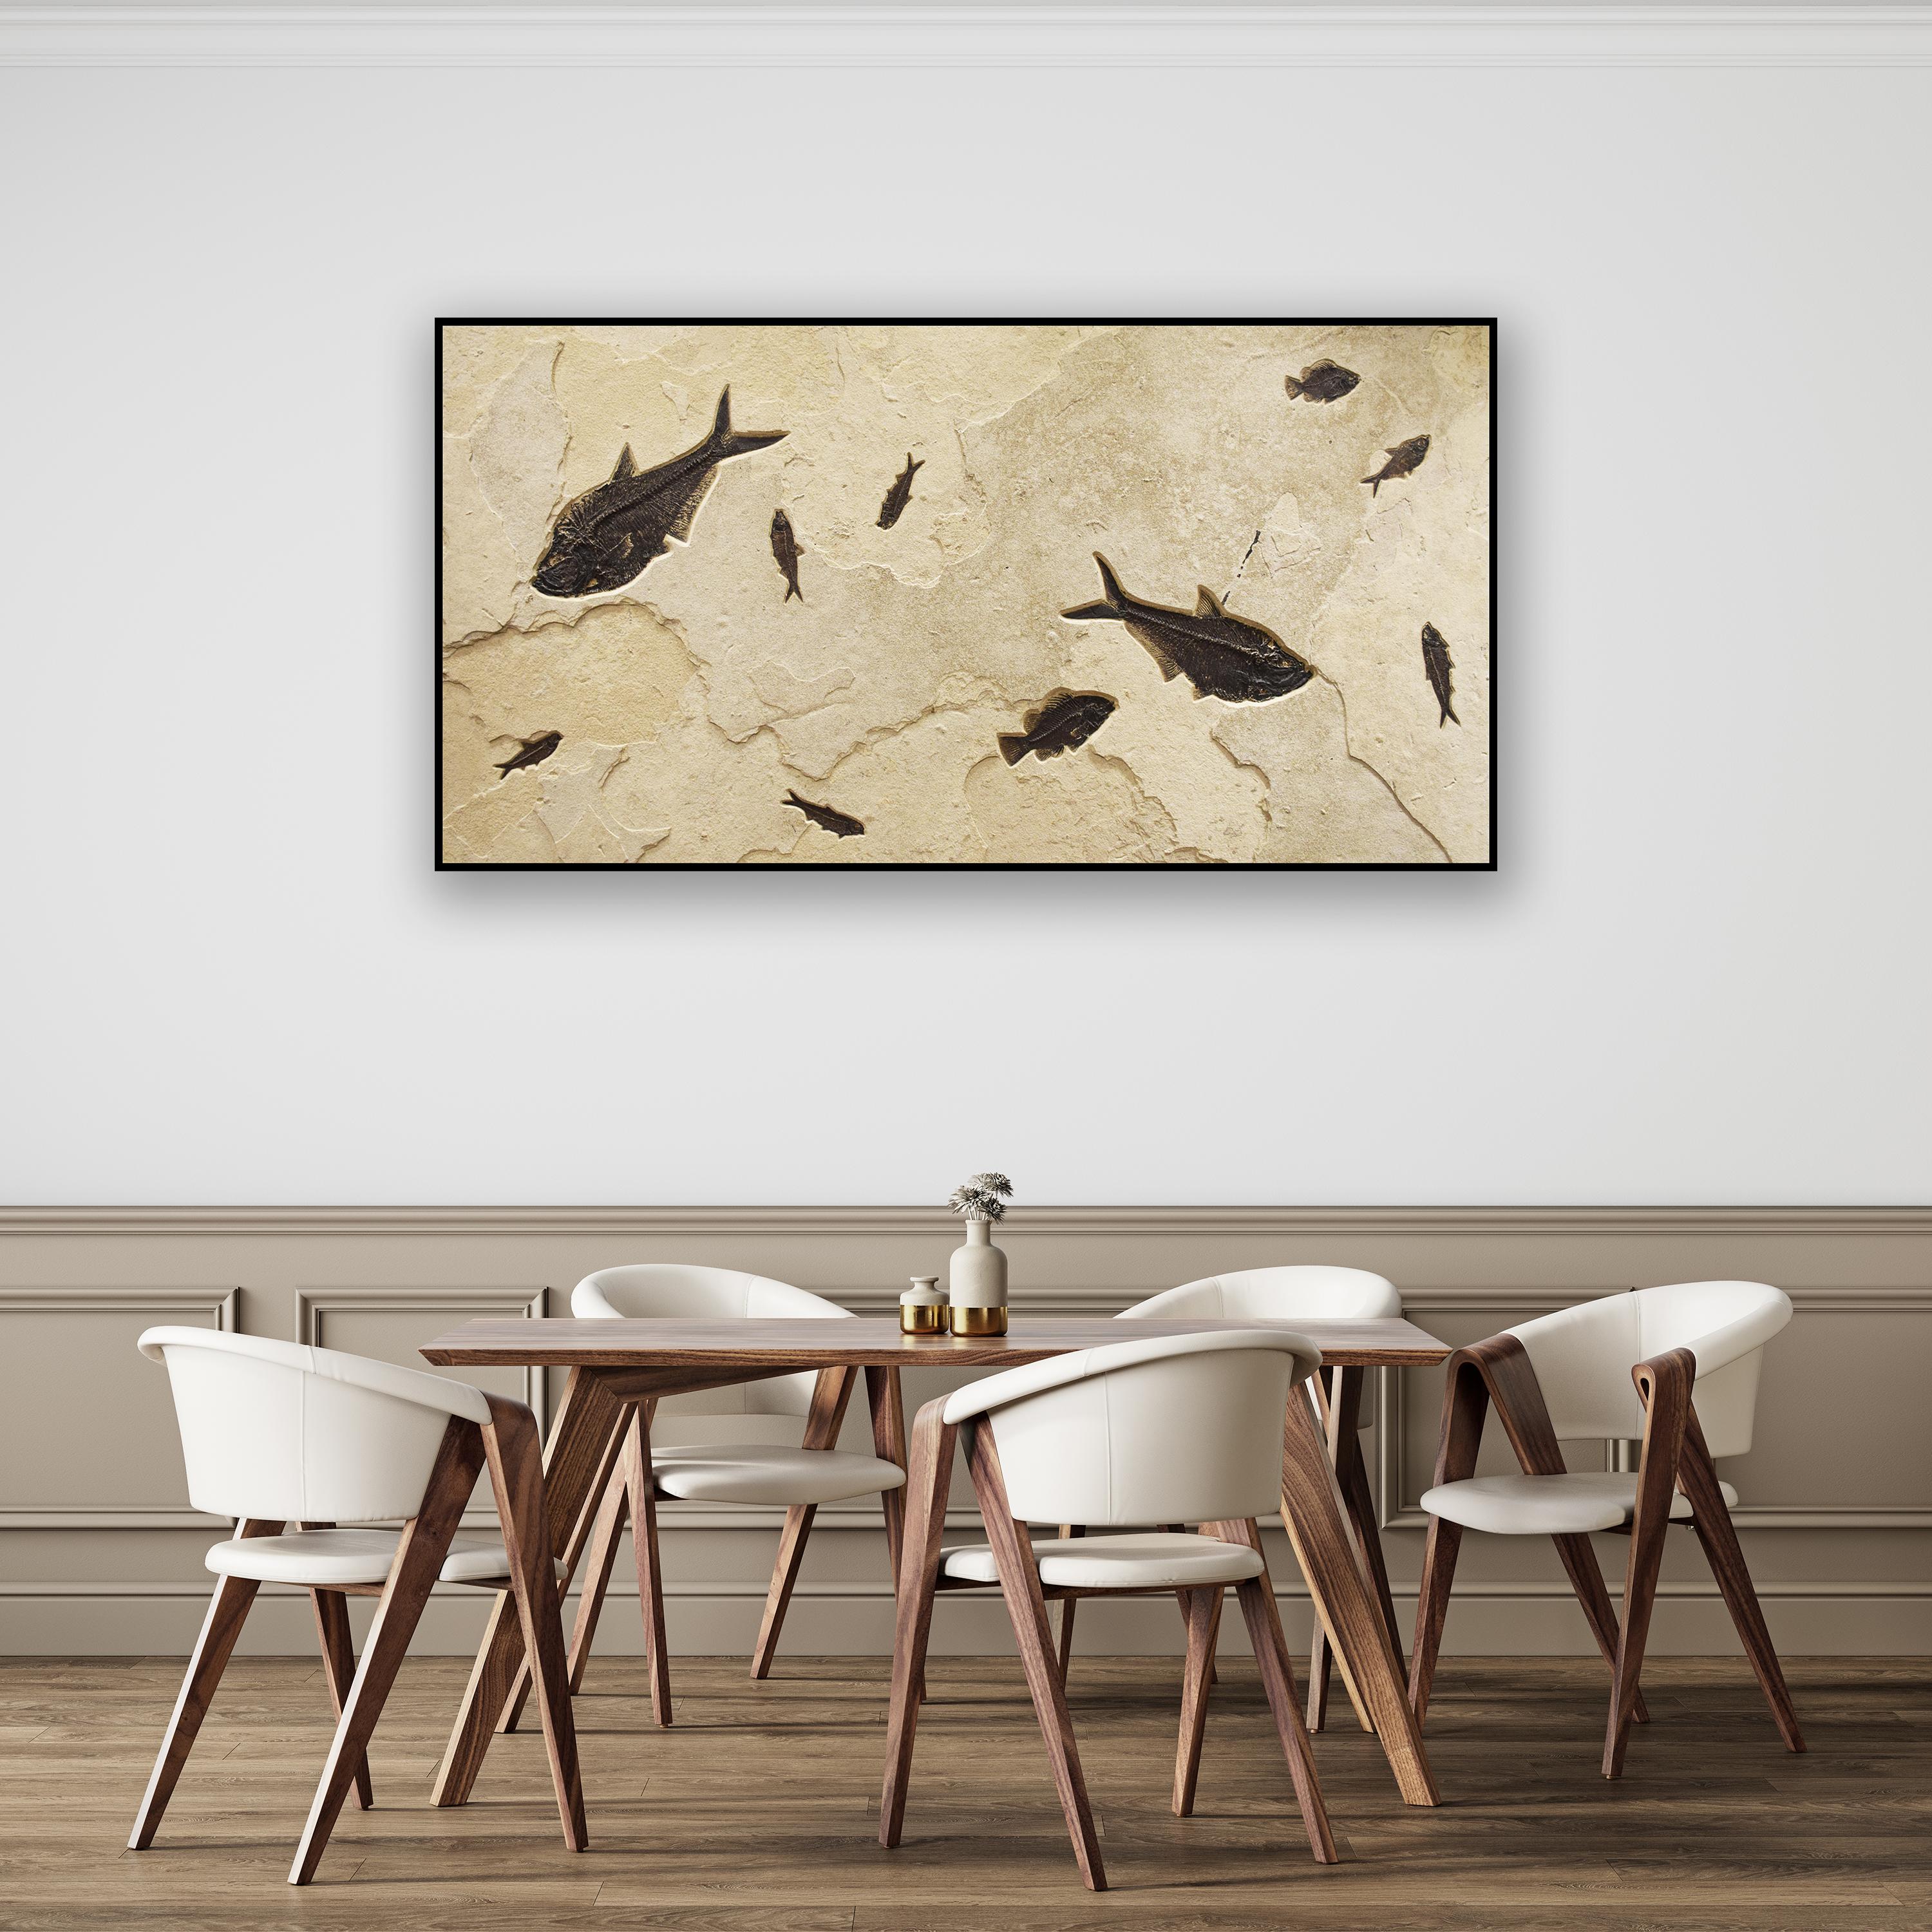 This beautiful piece of natural history makes an incredible statement and works beautifully with design styles ranging from traditional to modern. This sculptural mural features three Diplomystus dentatus, two Cockerellites liops (formerly known as